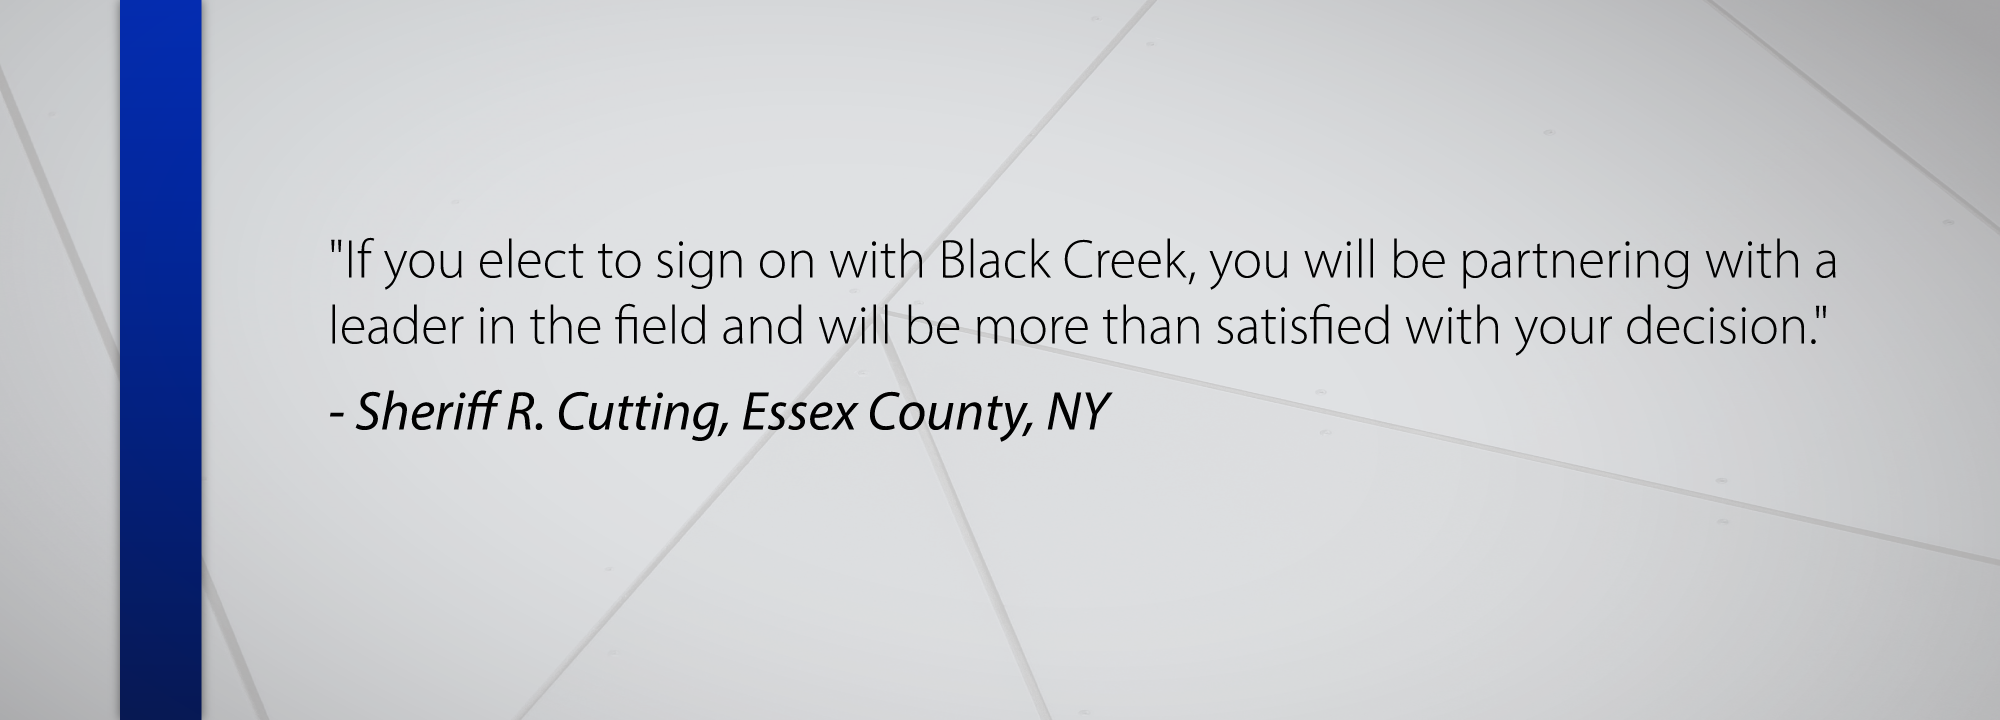 If you elect to sign on with Black Creek, you will be partnering with a leader in the field and will be more than satisfied with your decision. - Sheriff R. Cutting Essex County, NY